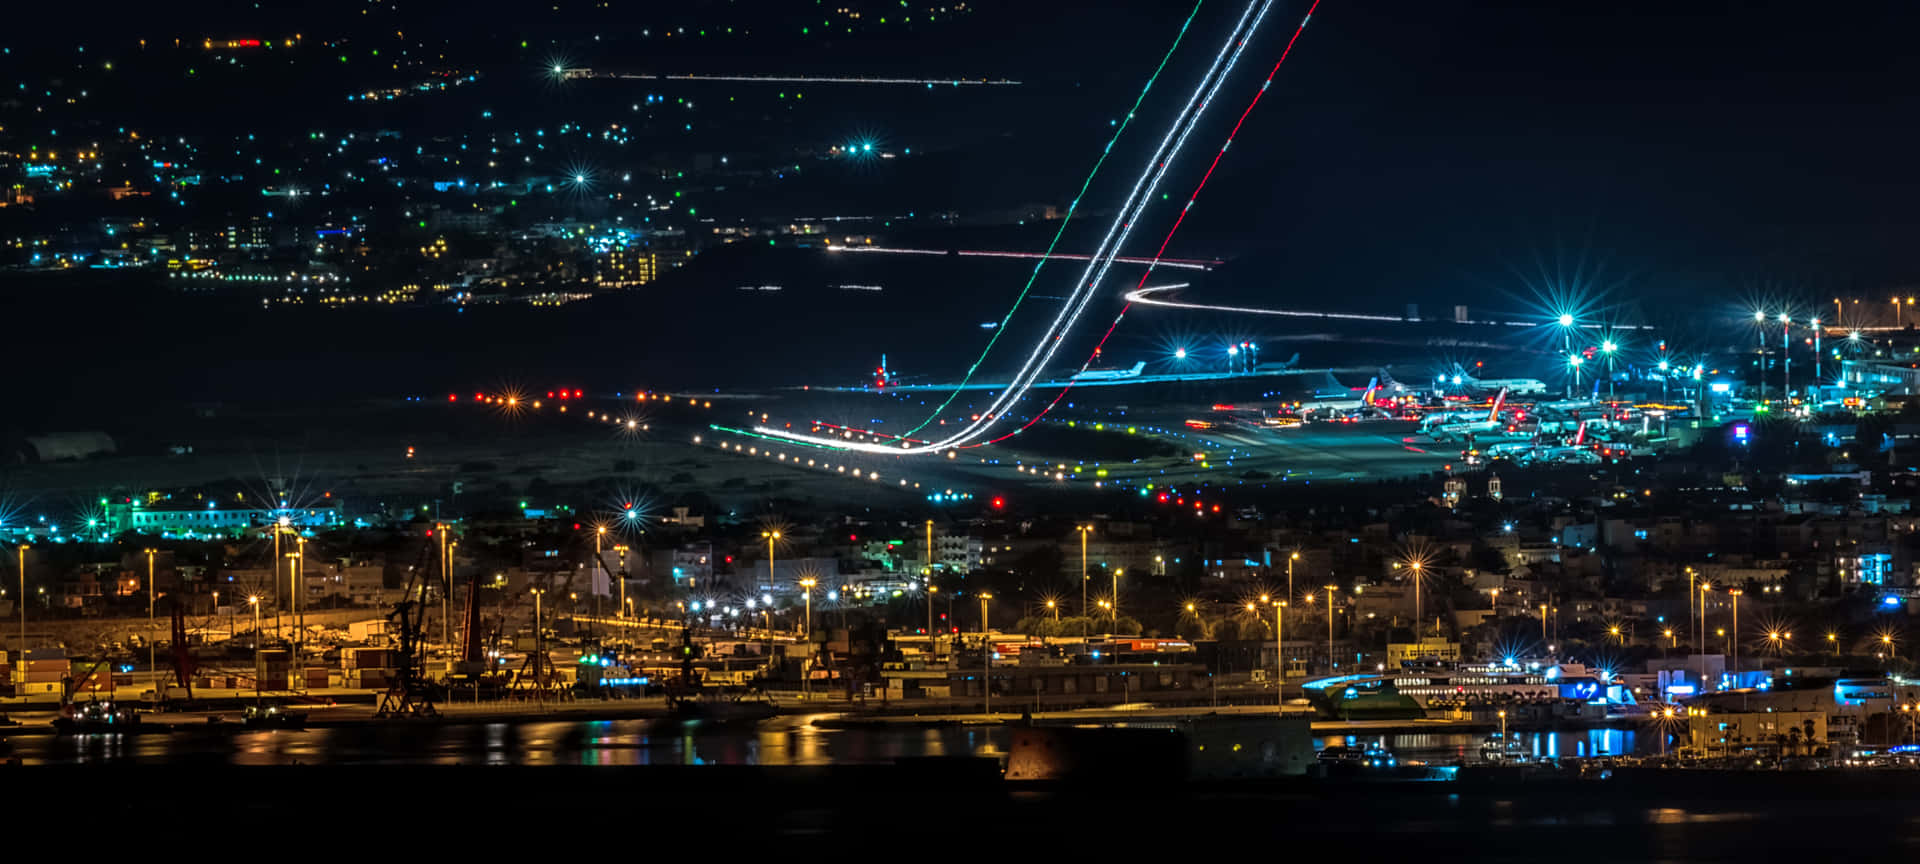 Watch planes depart and land at a breathtaking airport.